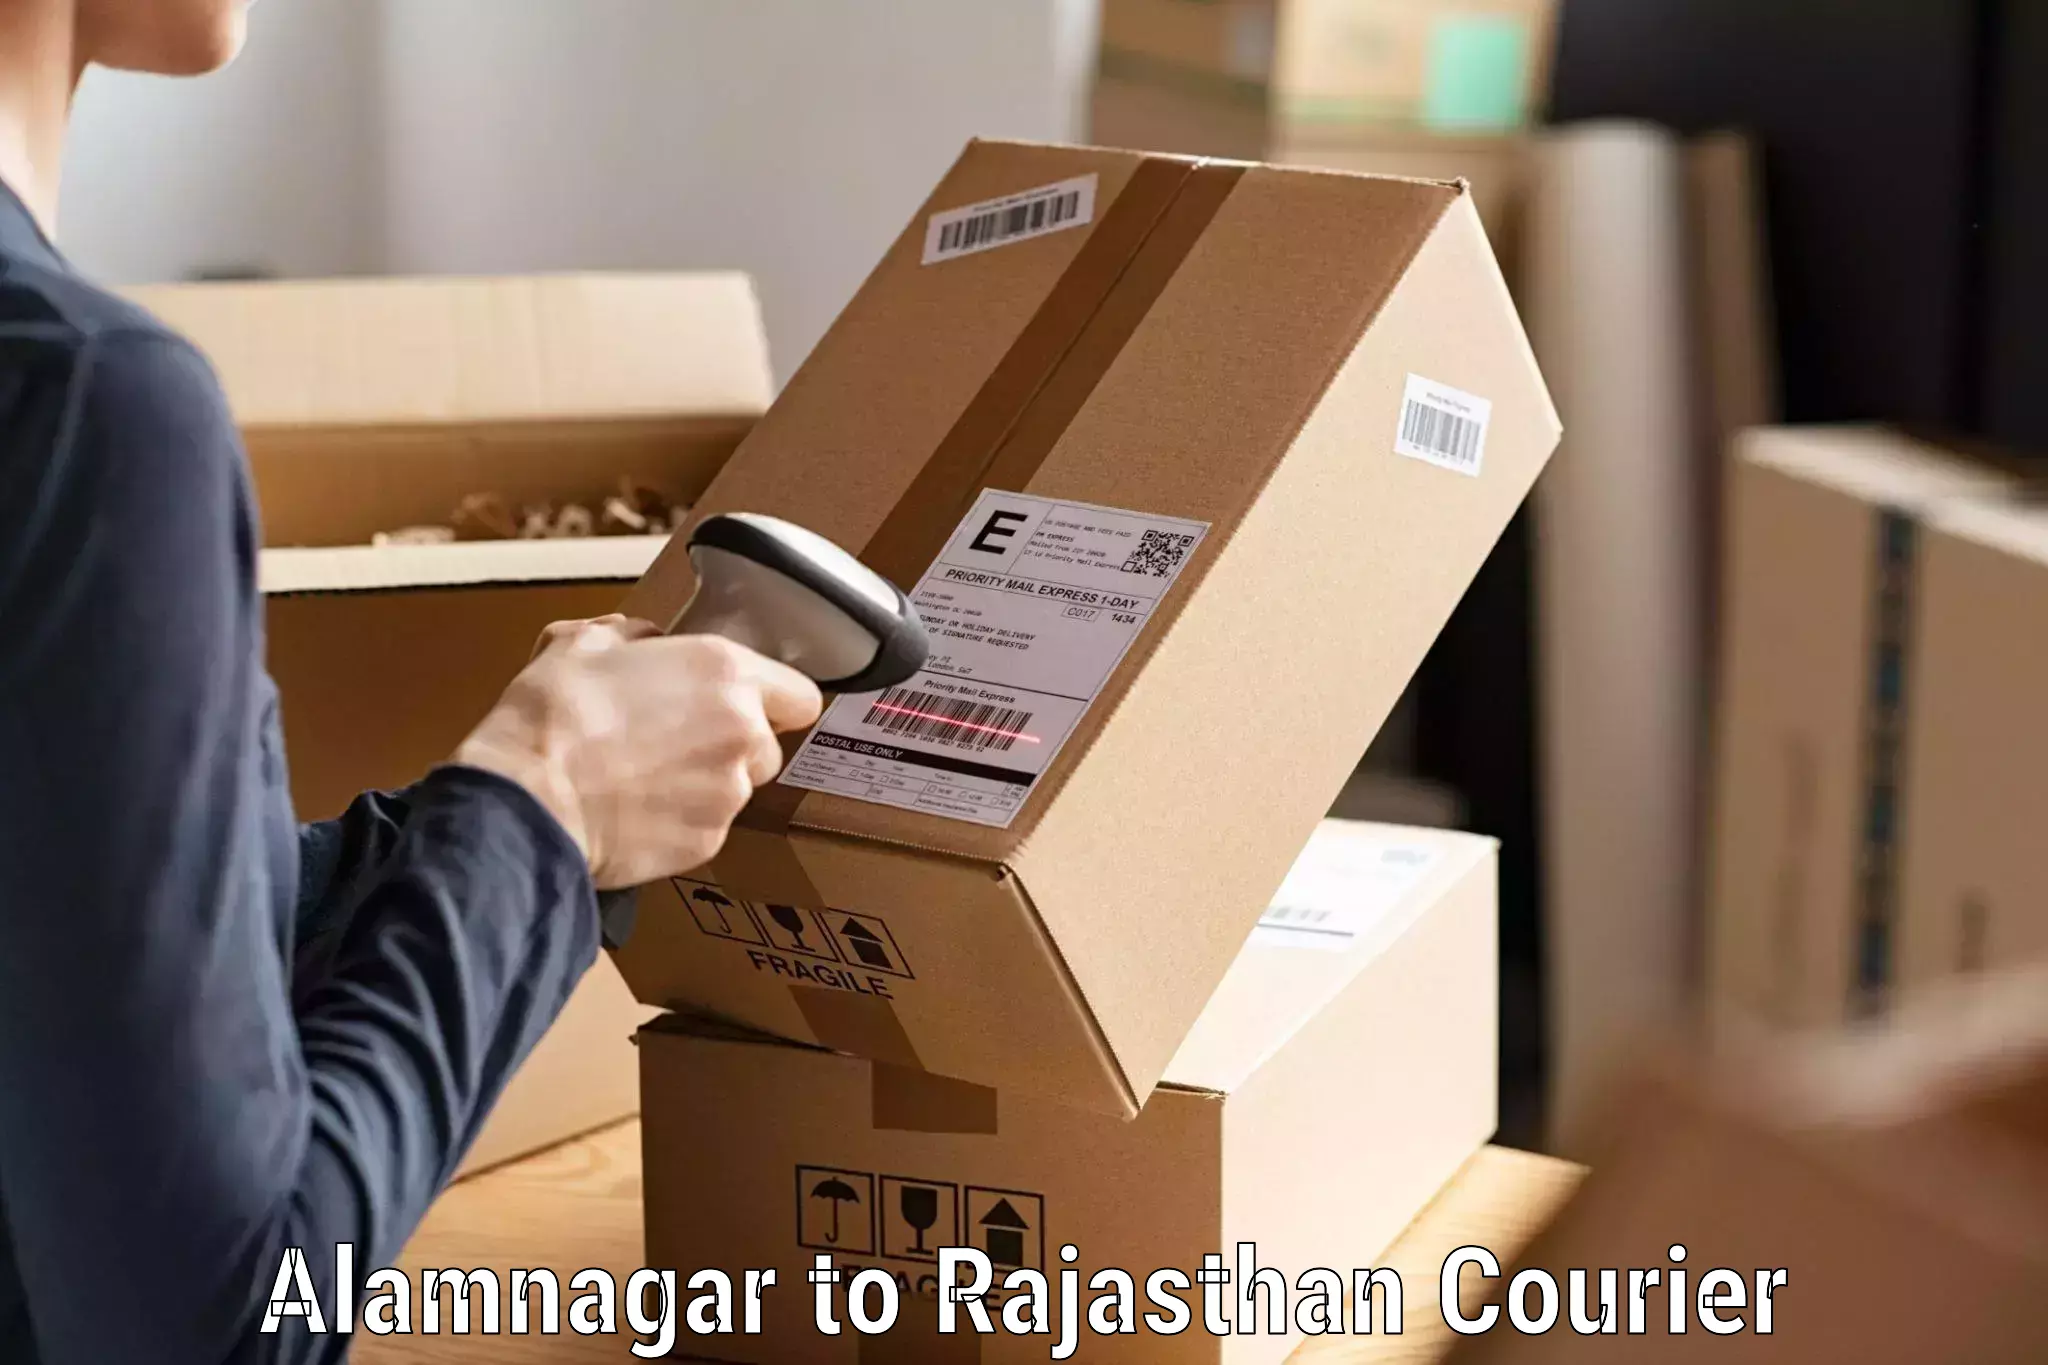 Flexible parcel services in Alamnagar to Piparcity